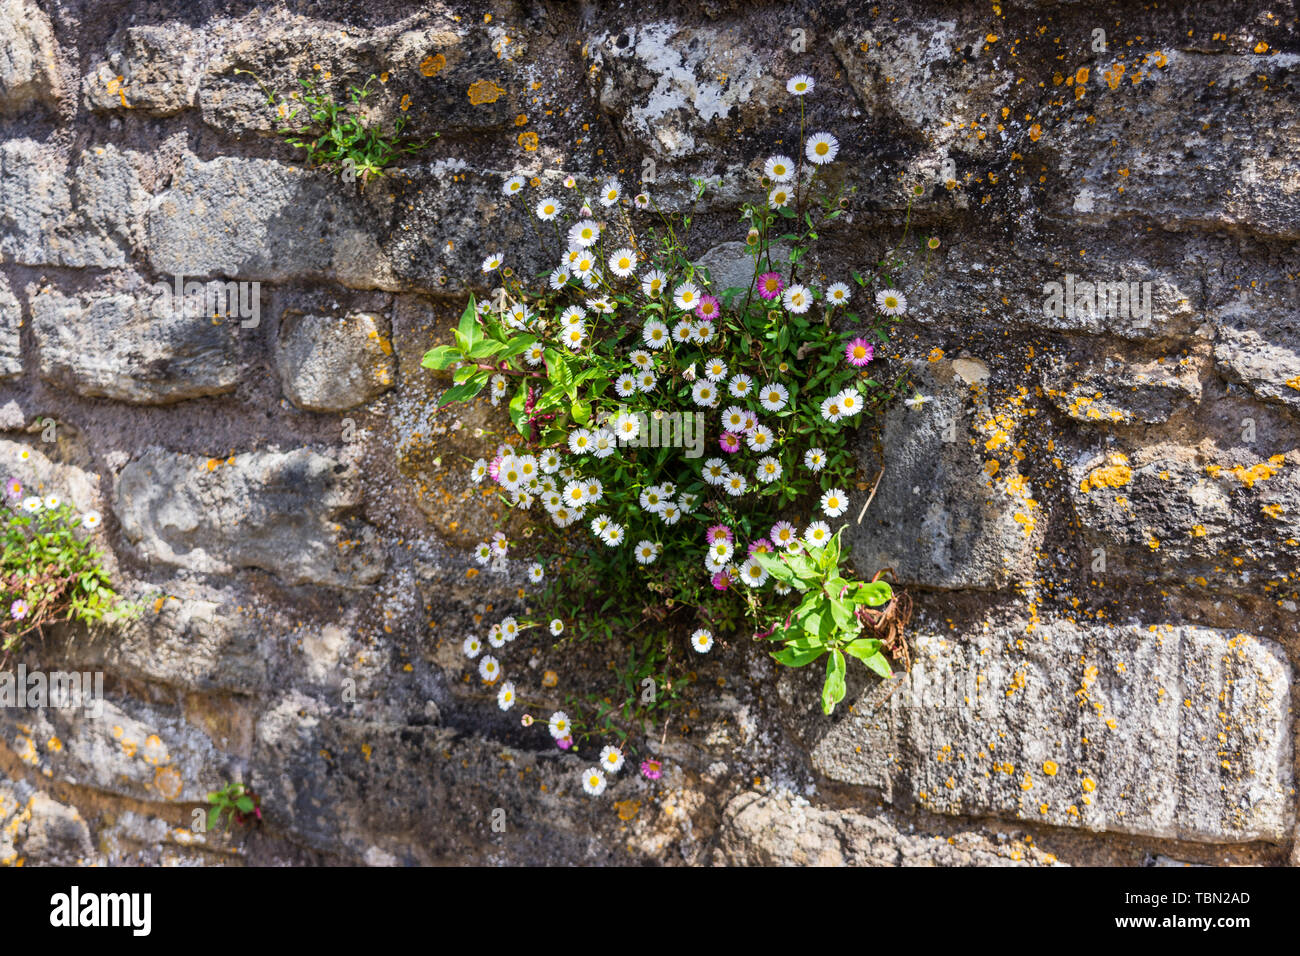 A clump of Mexican Fleabane (Erigeron karvinskianus) on an old stone brick wall with lichen and a small amount of other growth in Bradford on Avon Stock Photo